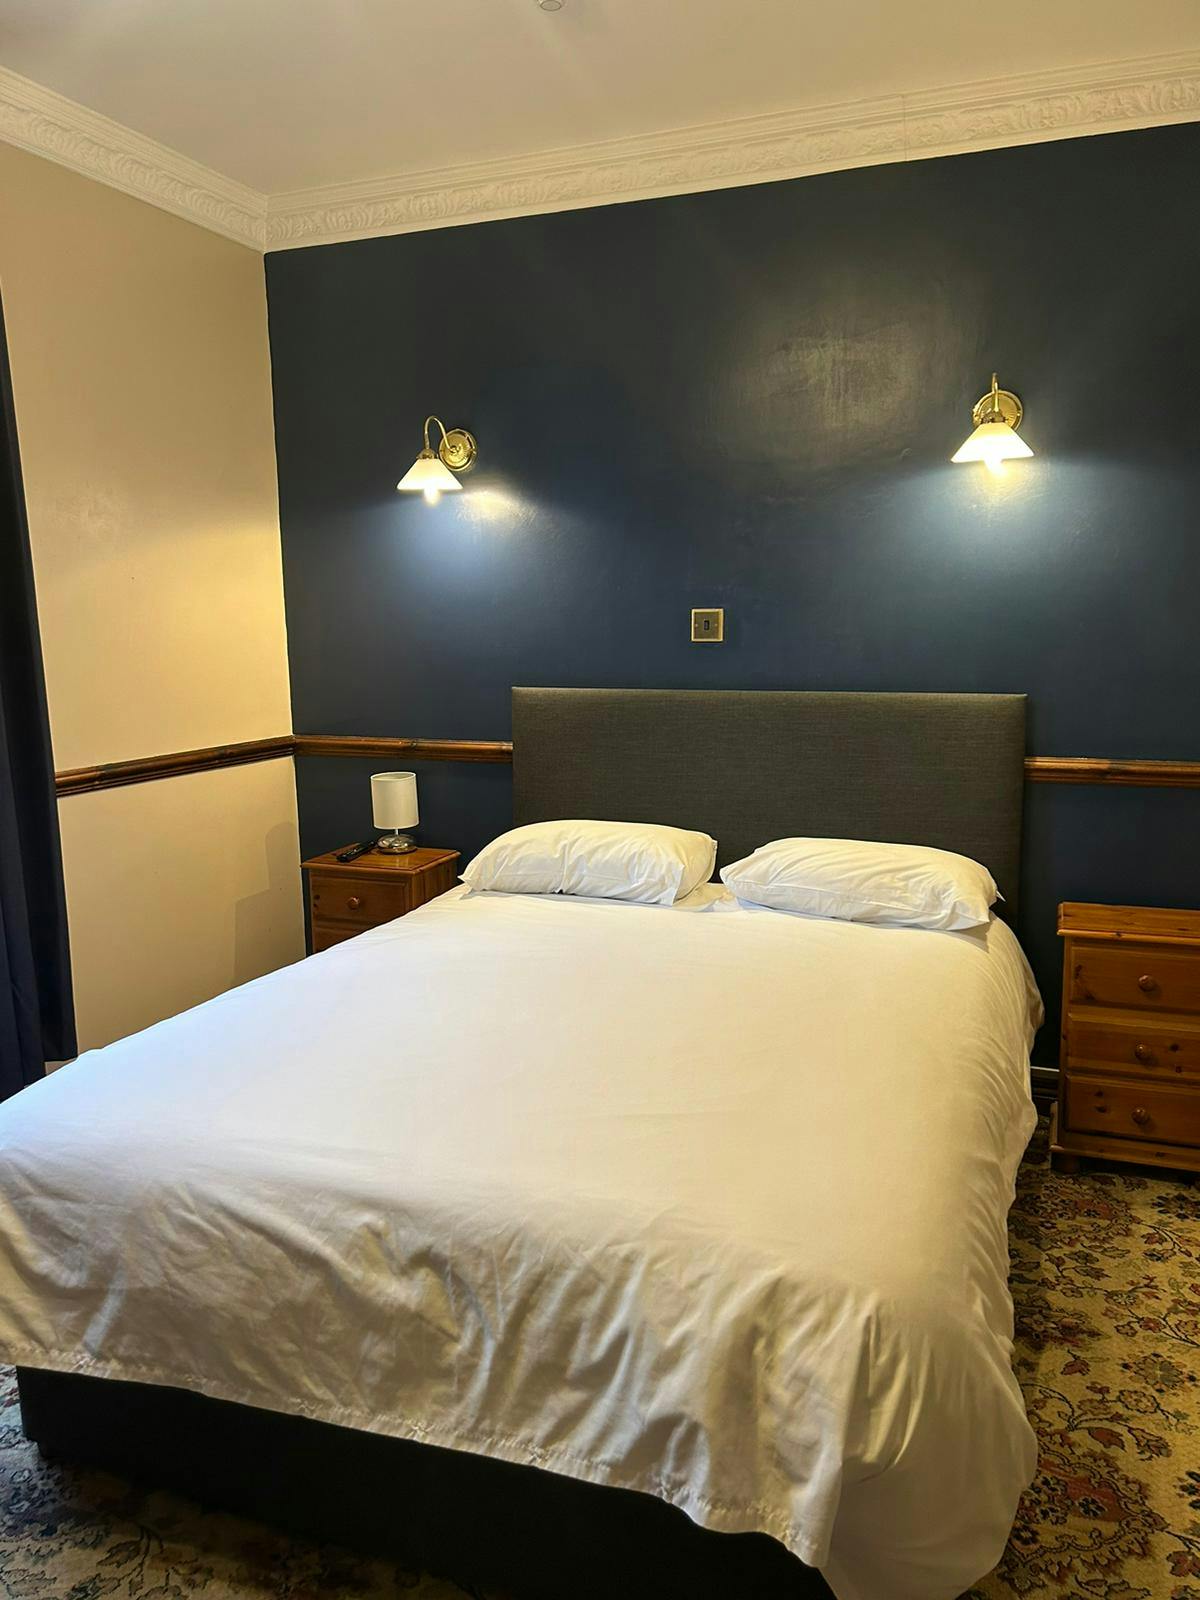 Sleep soundly in our comfortable rooms.